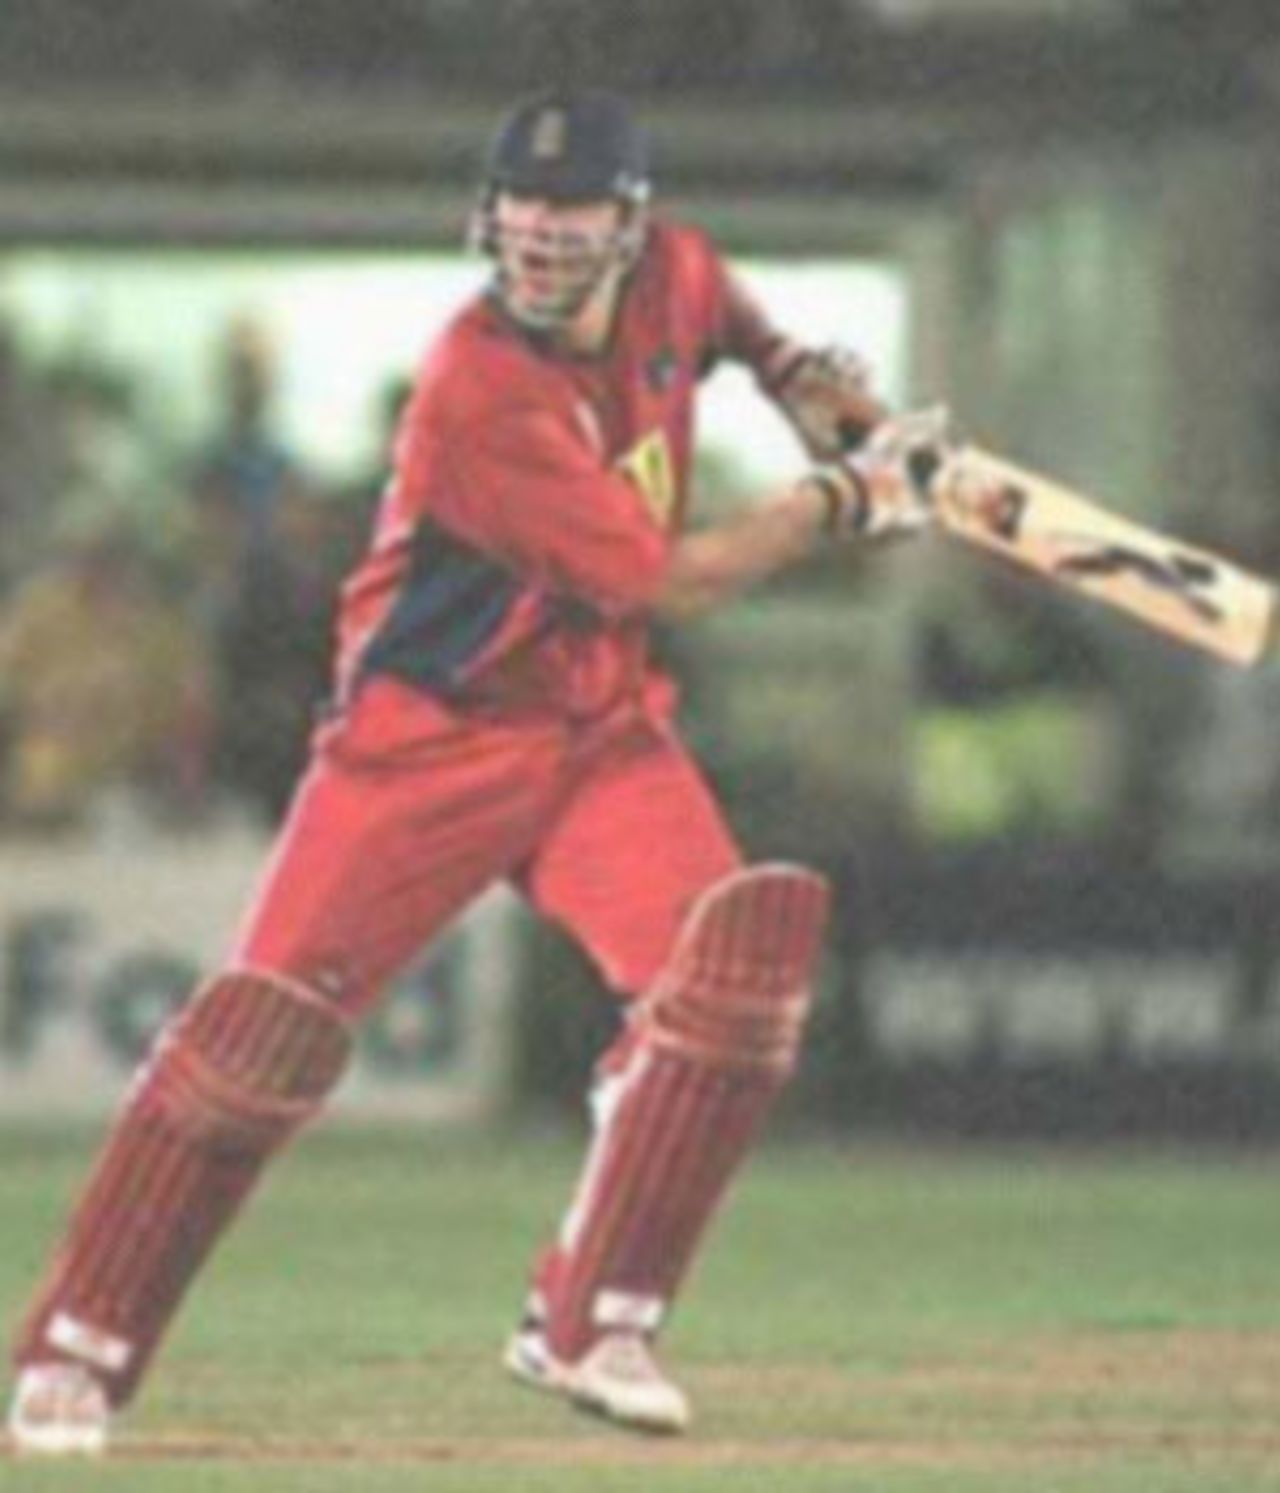 Flintoff looks for a single after playing the square cut, National League Division One, 2000, Sussex v Lancashire, New County Ground, Hove, Brighton, 07 August 2000.